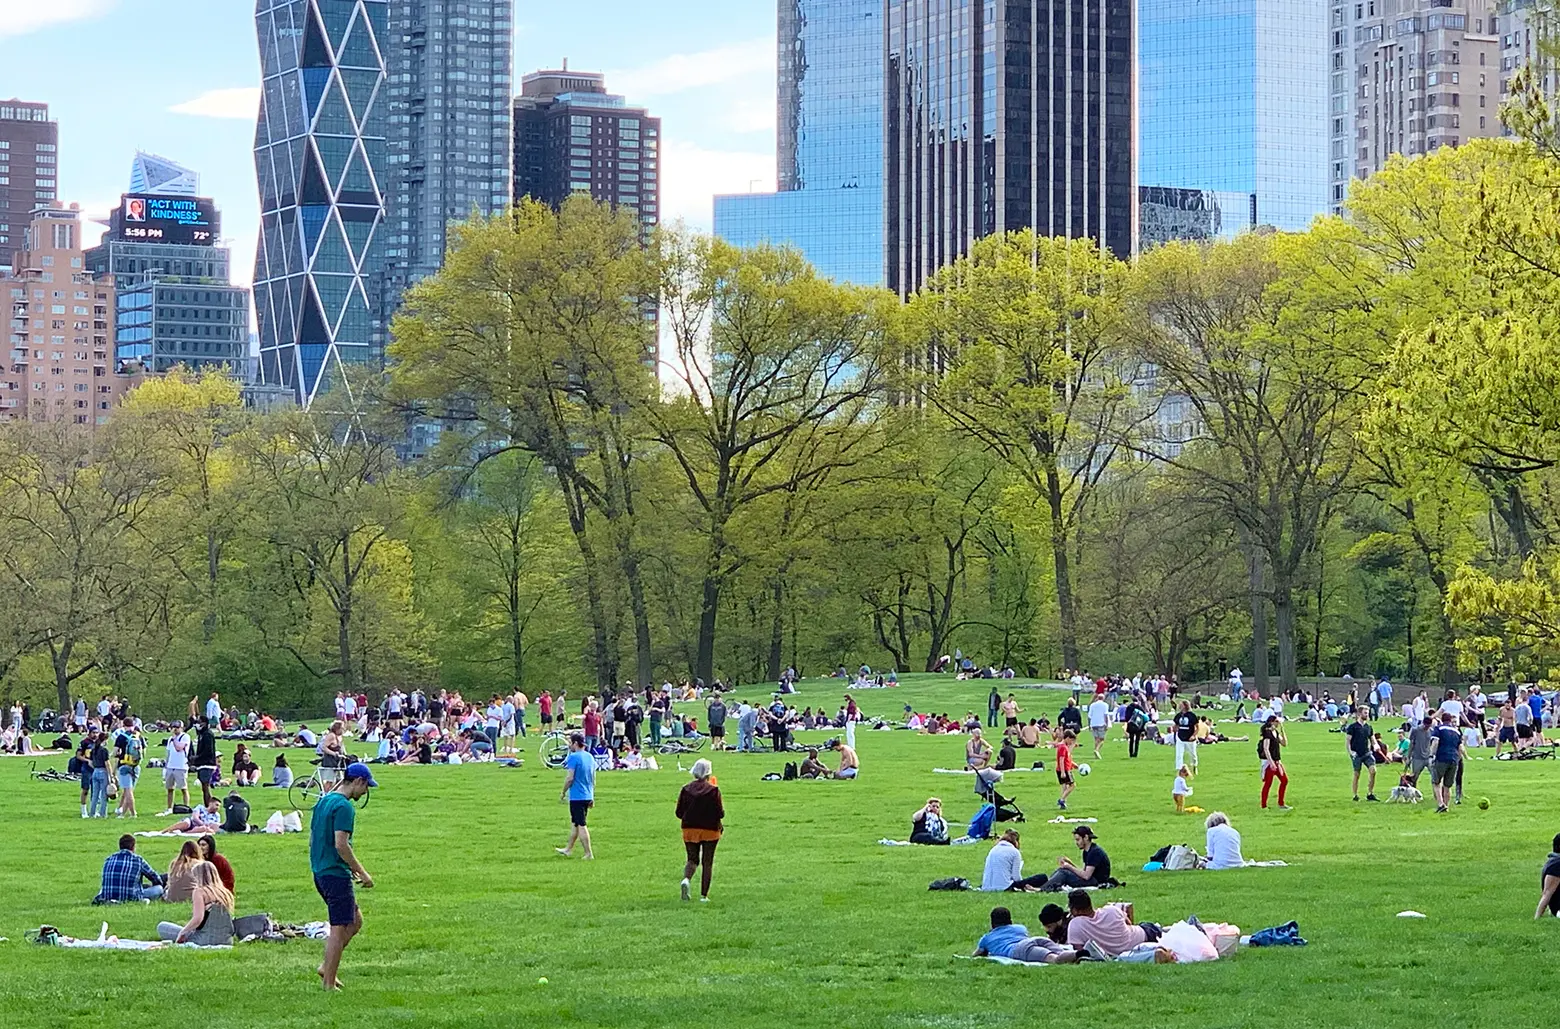 During the pandemic’s peak, low-income New Yorkers lacked access to quality green space